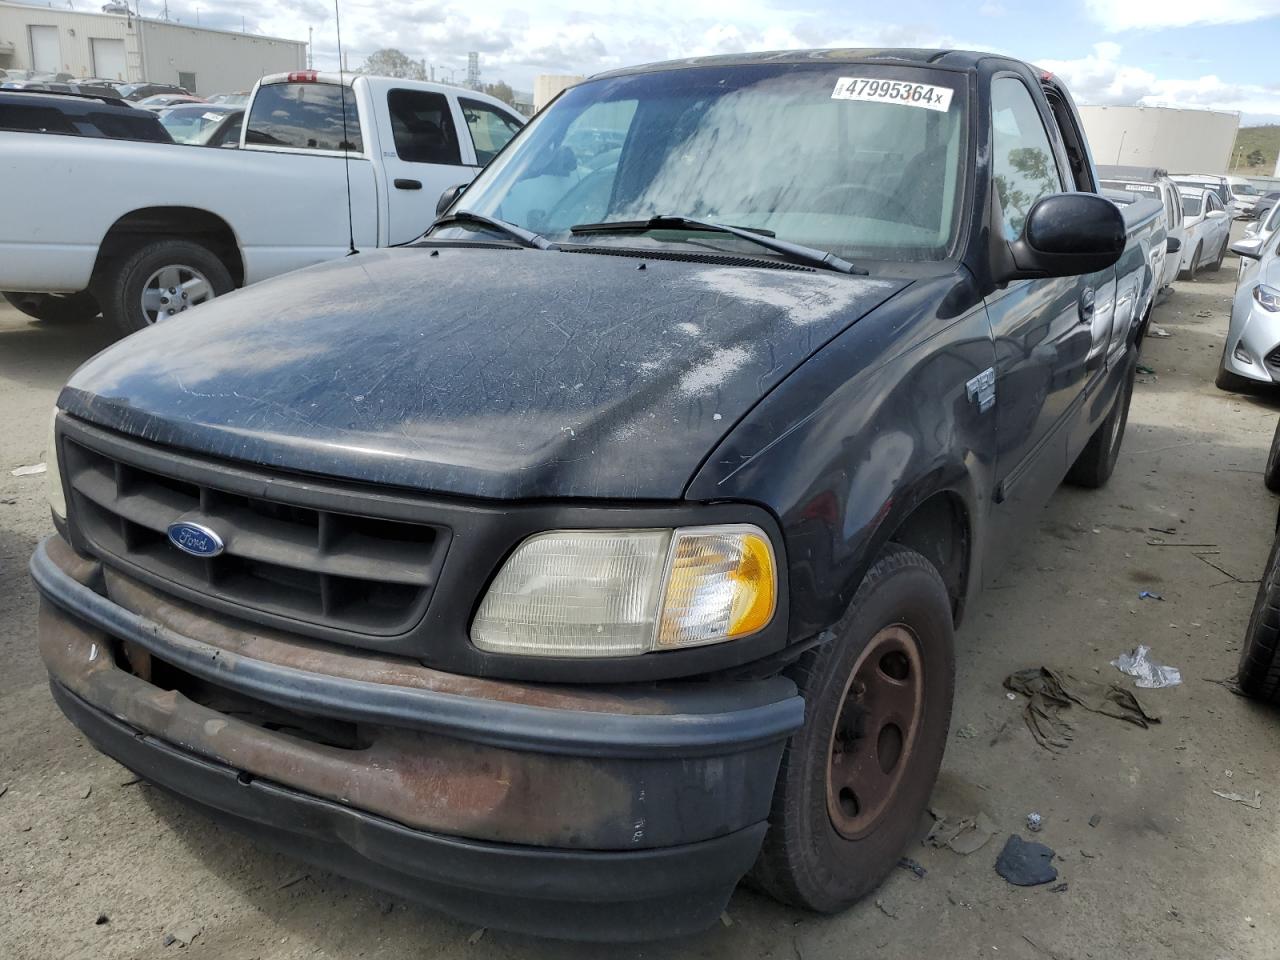 vin: 1FTZX1760WKC38740 1FTZX1760WKC38740 1998 ford f-150 4600 for Sale in 94553 1450, Ca - Martinez, Martinez, USA